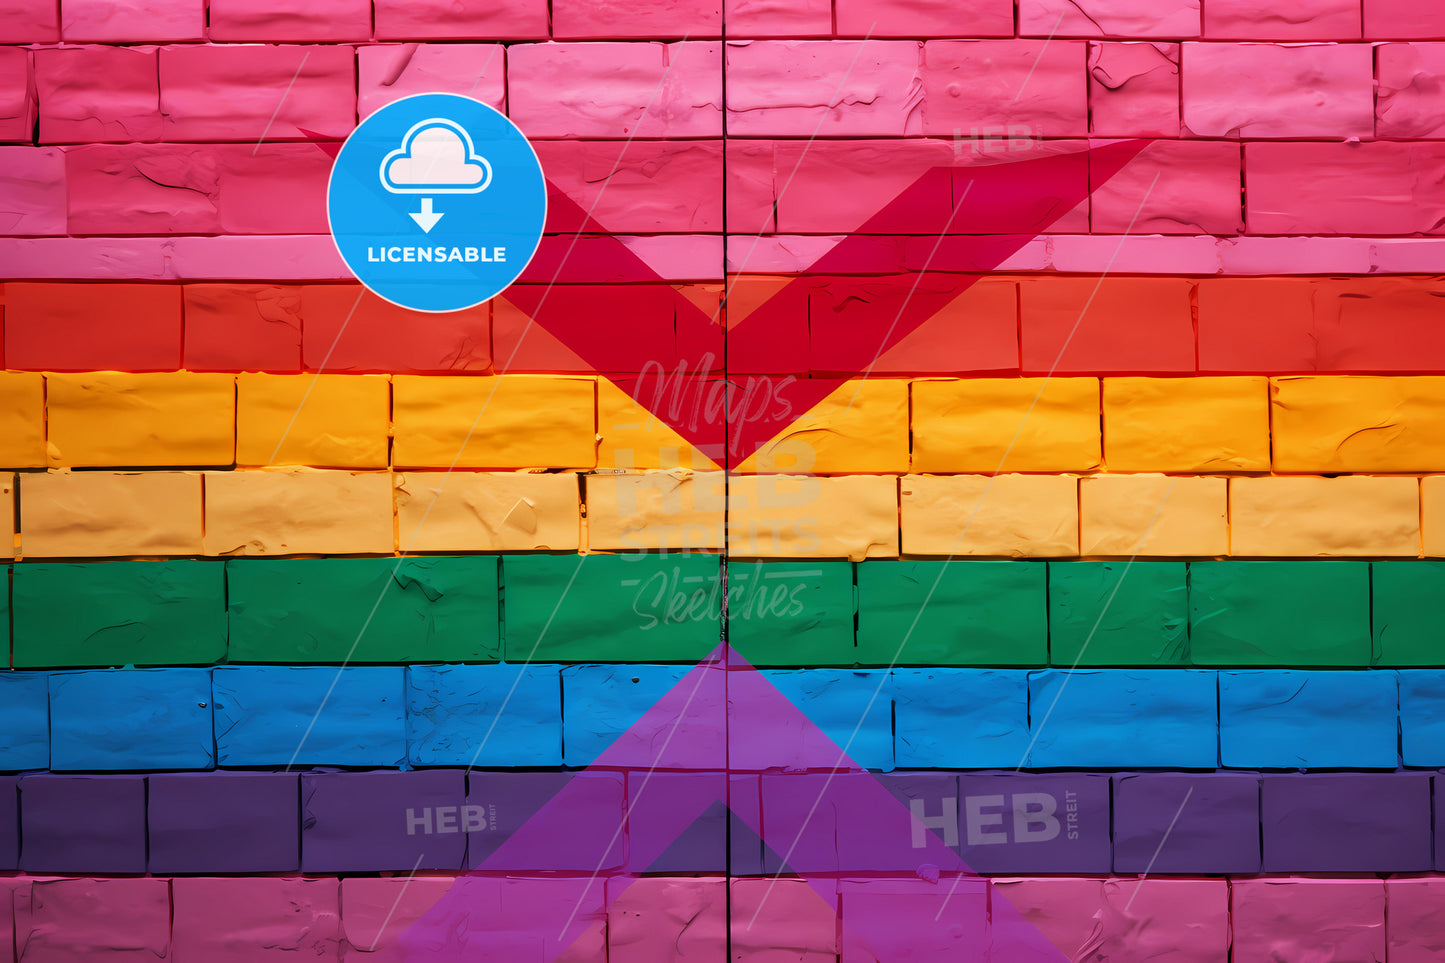 Rainbow Flag Wallpaper With Two Arrows, A Brick Wall With A Rainbow Flag Painted On It